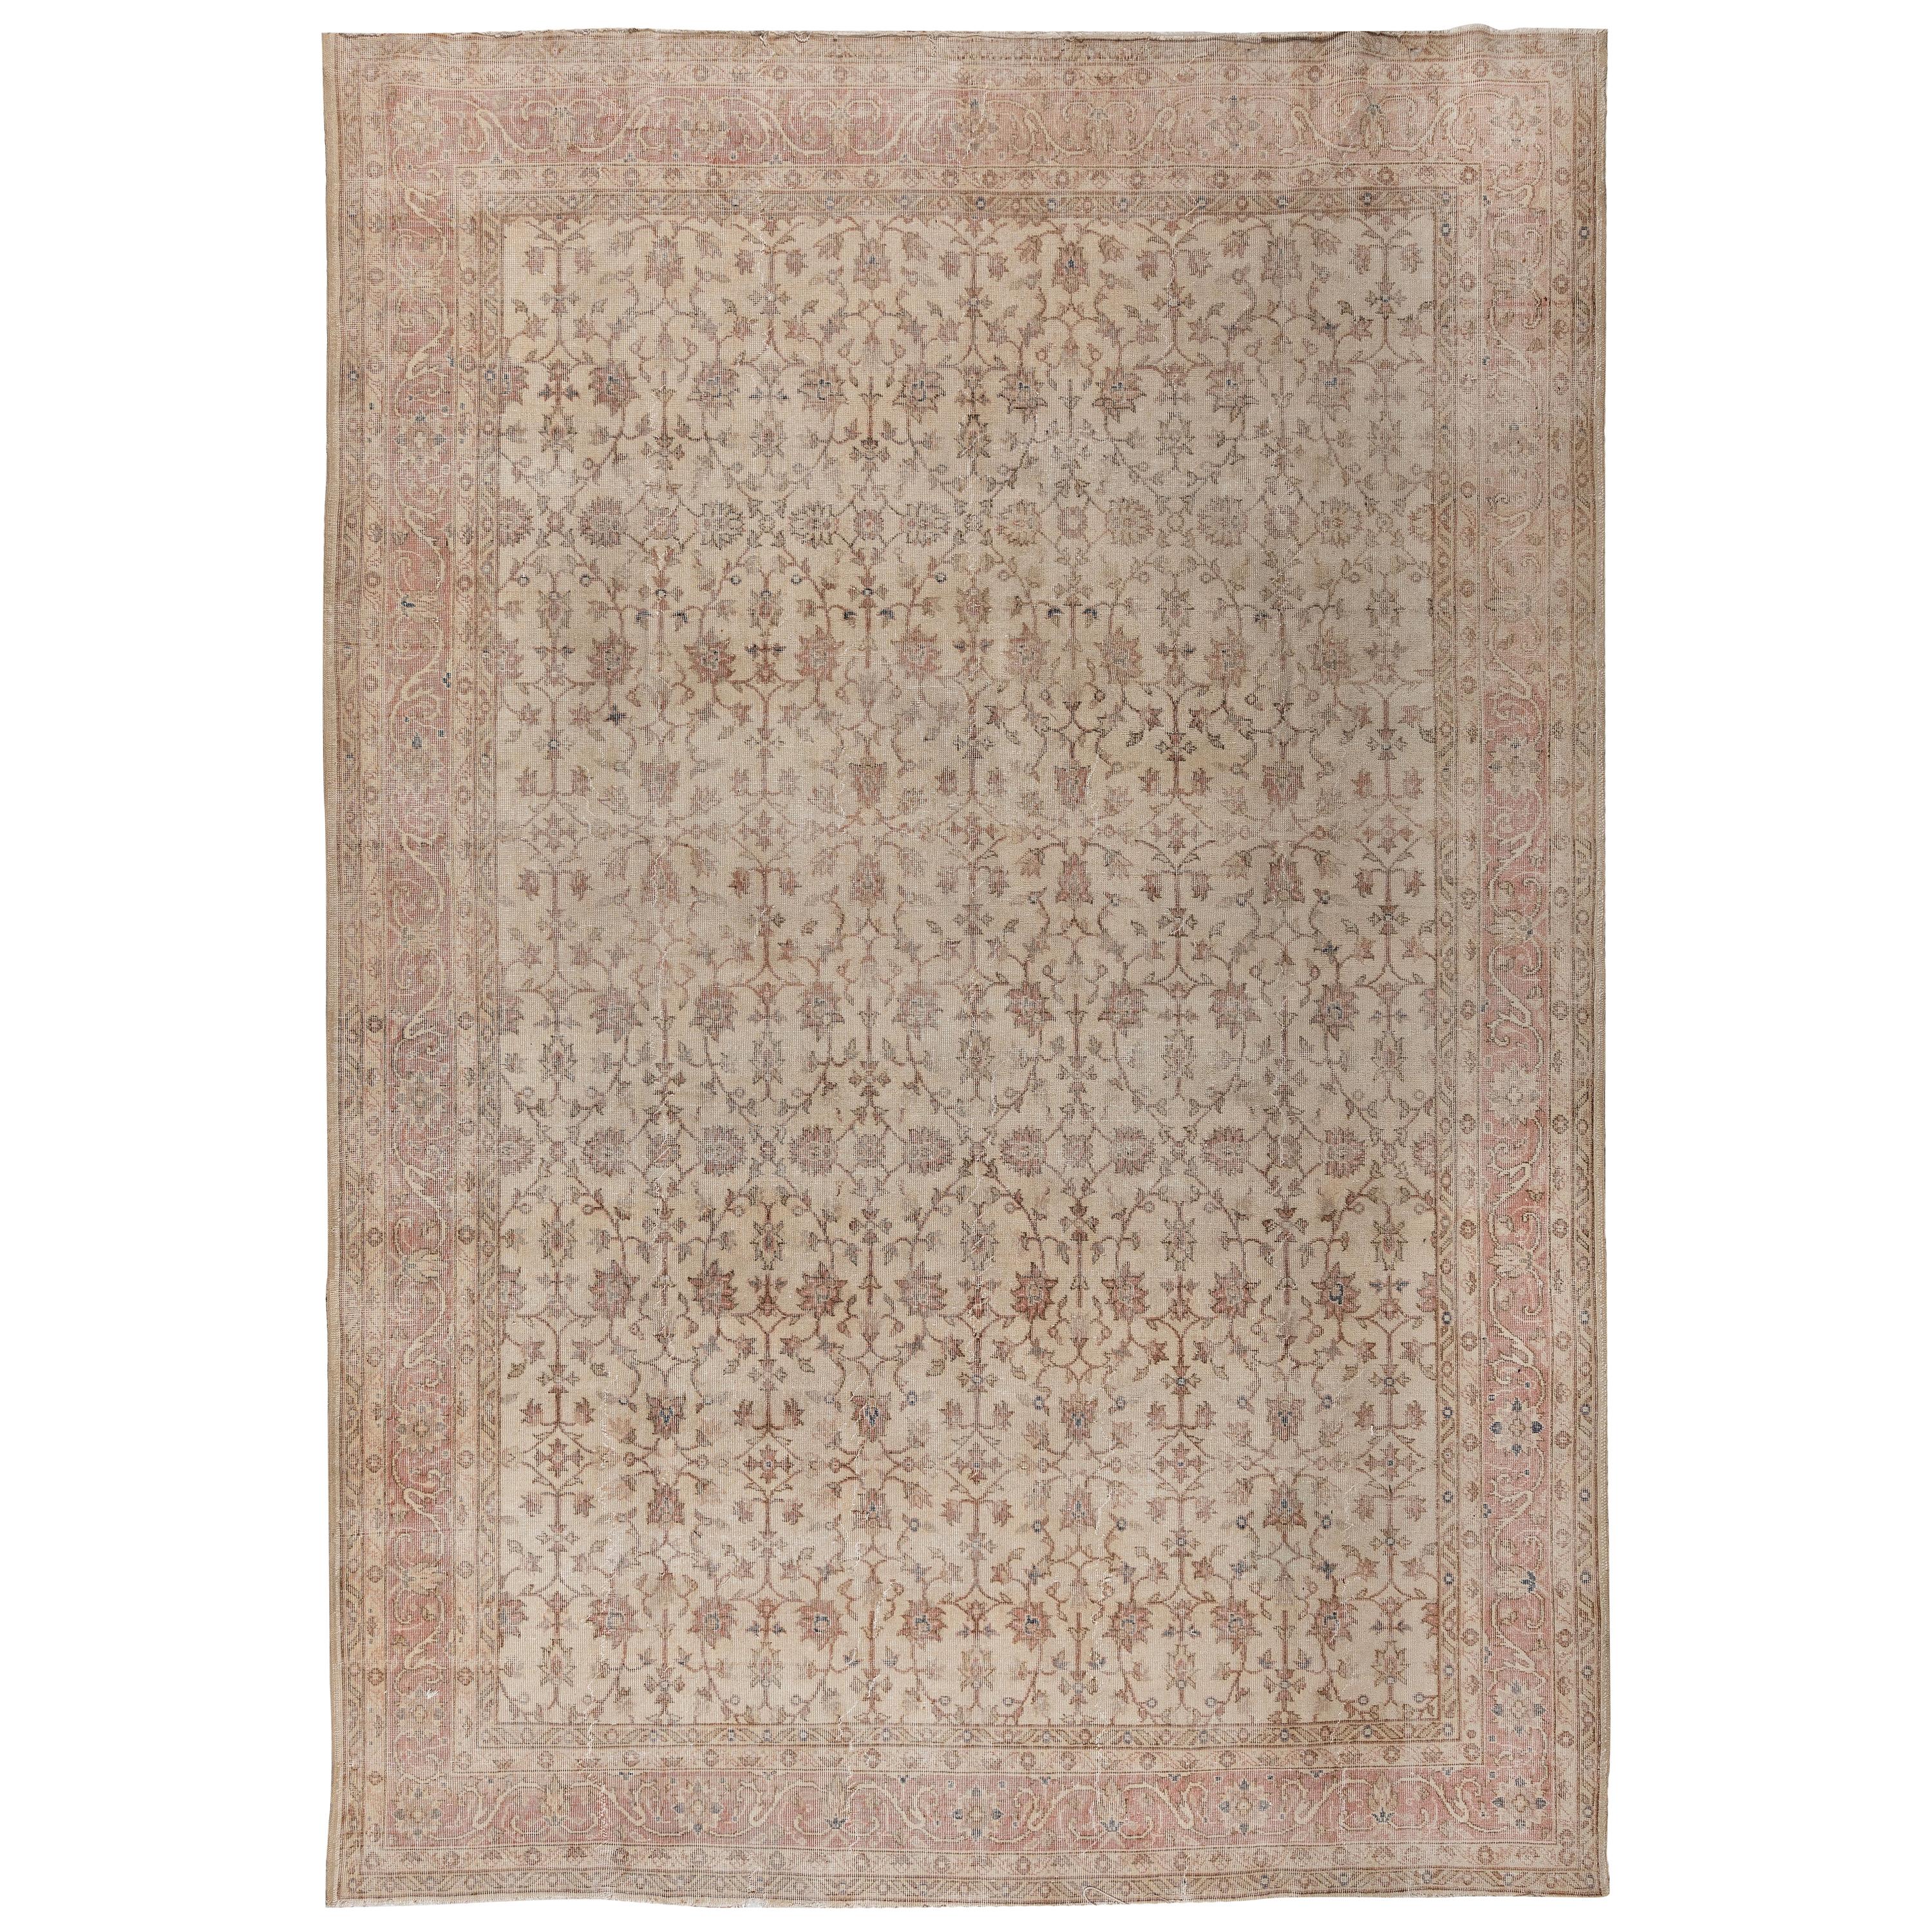 9.5x12.7 Ft Vintage Hand Knotted Oushak Rug in Soft, Muted Colors For Sale